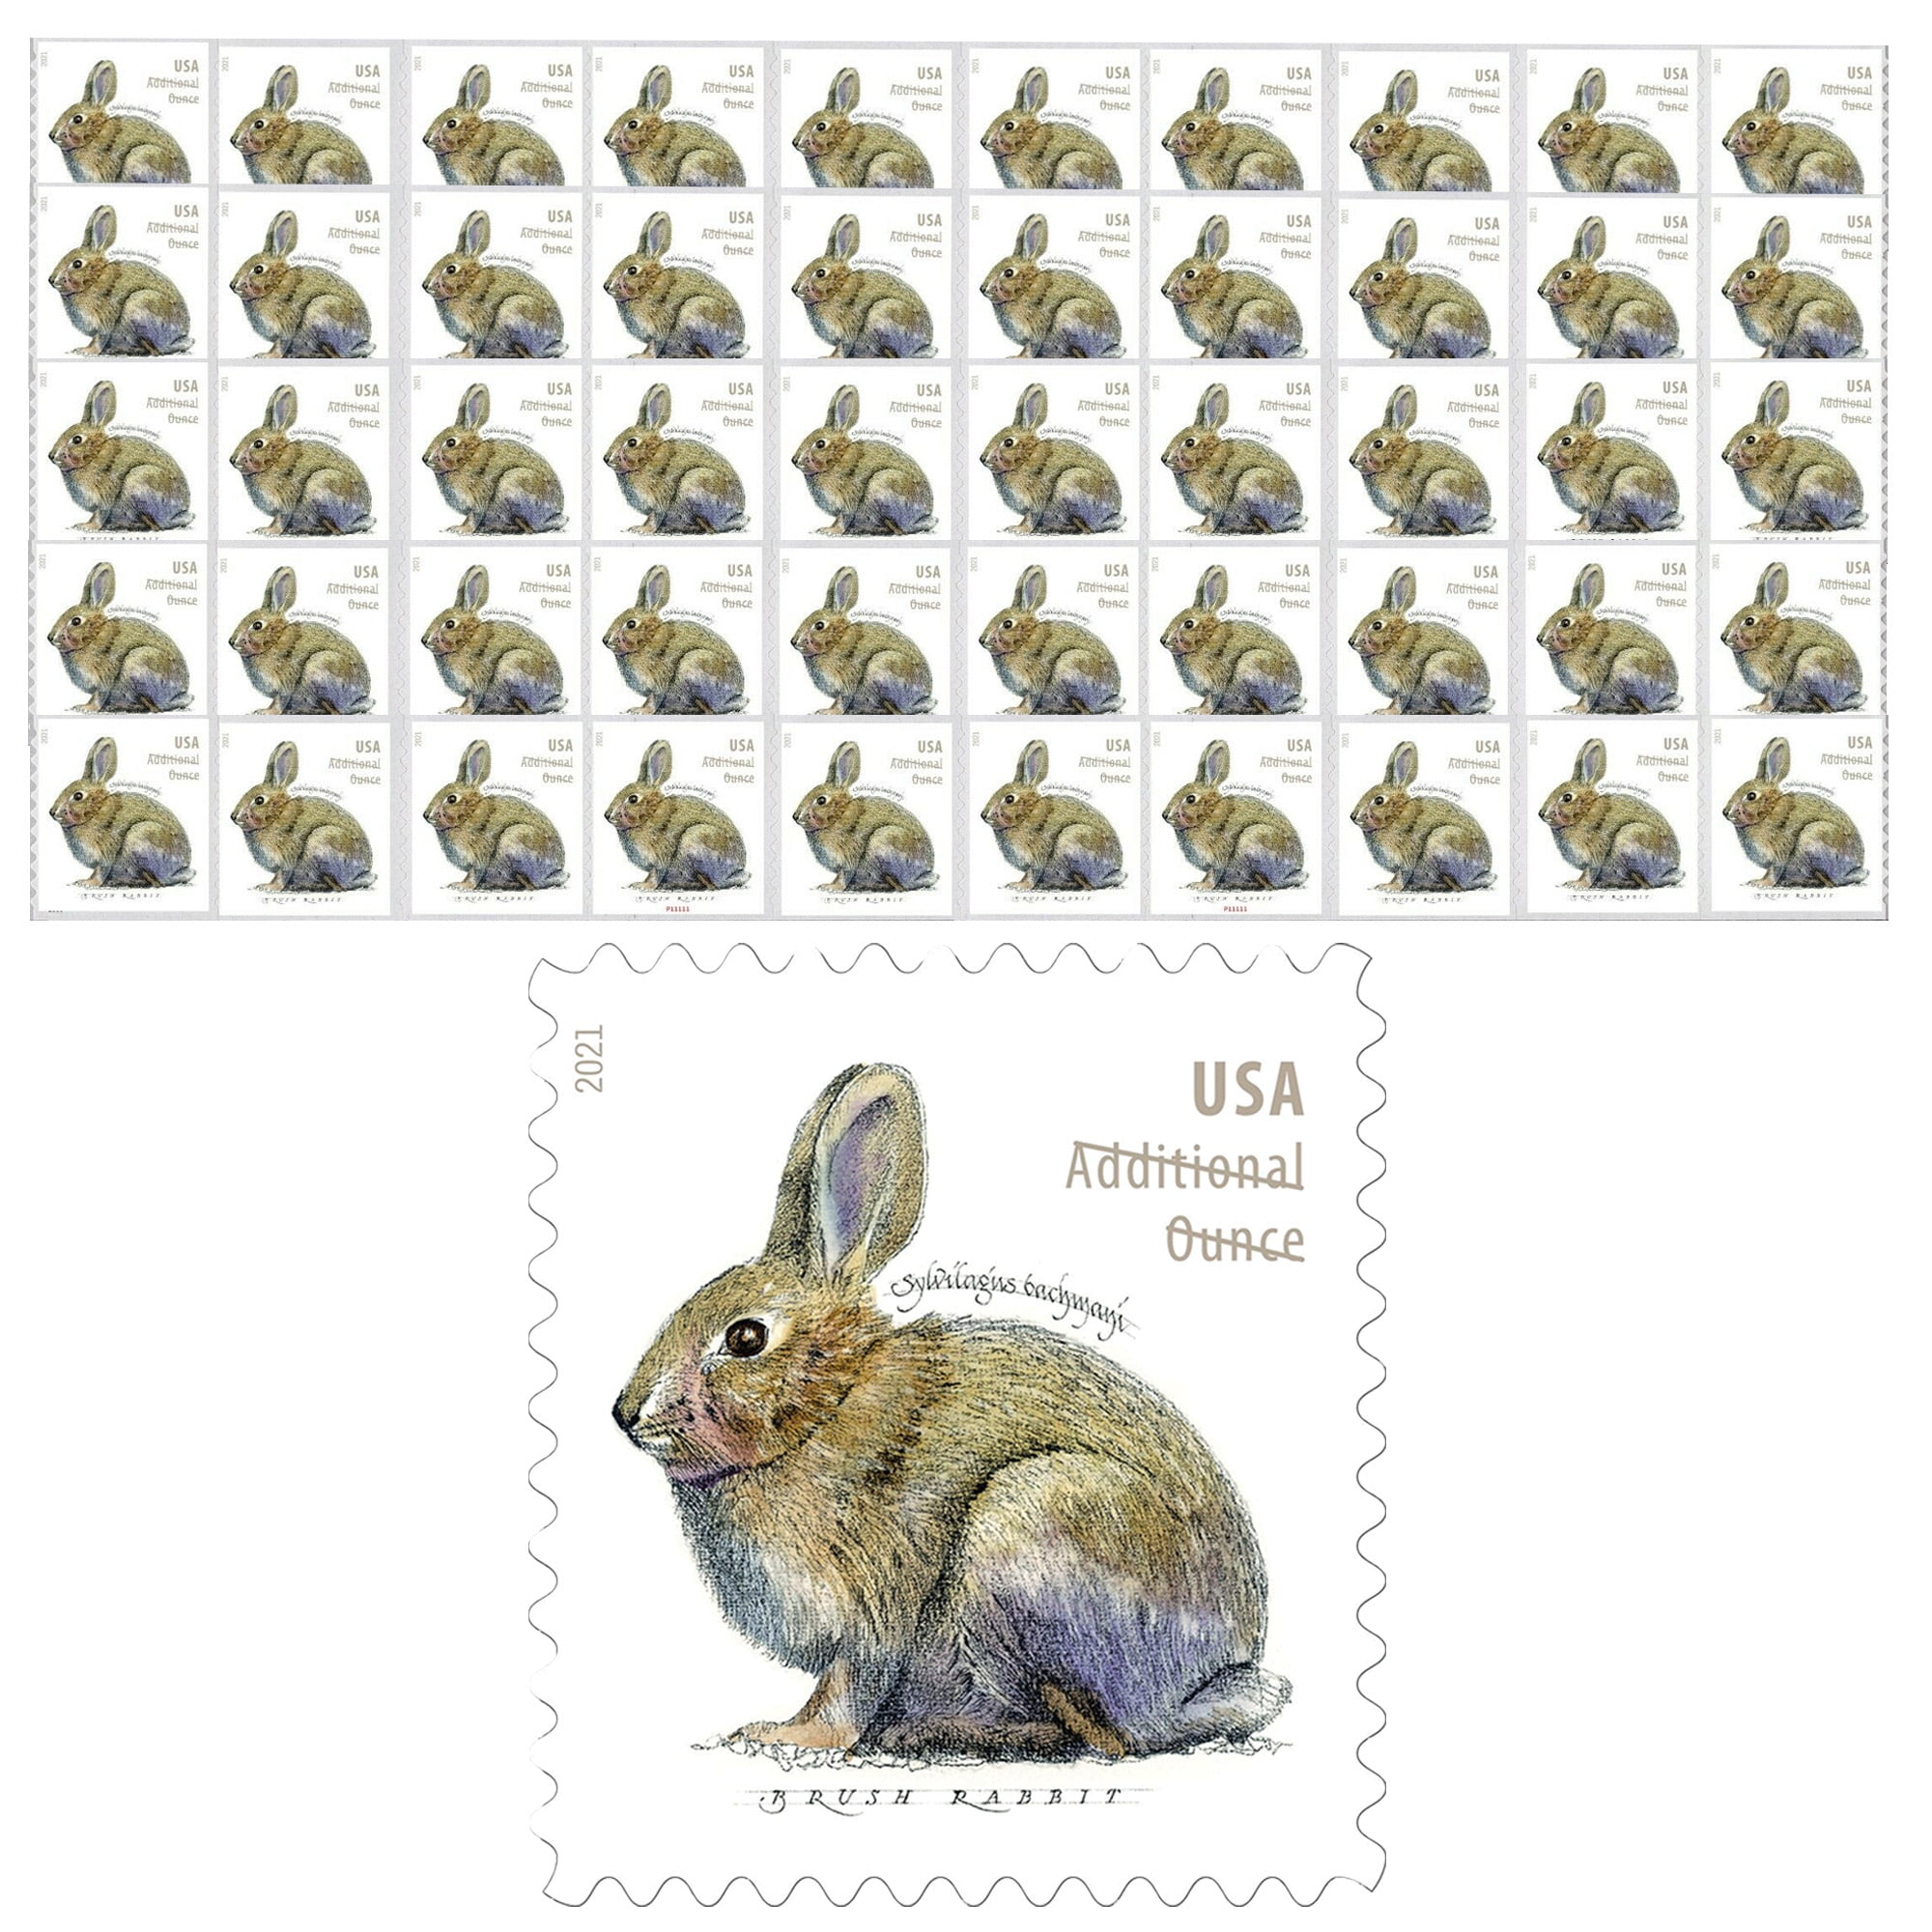 Ten 10 Brush Rabbit Stamps 20c Self-adhesive Stamps  Pristine as Issued by the Post Office Valid for Postage 10 Pack